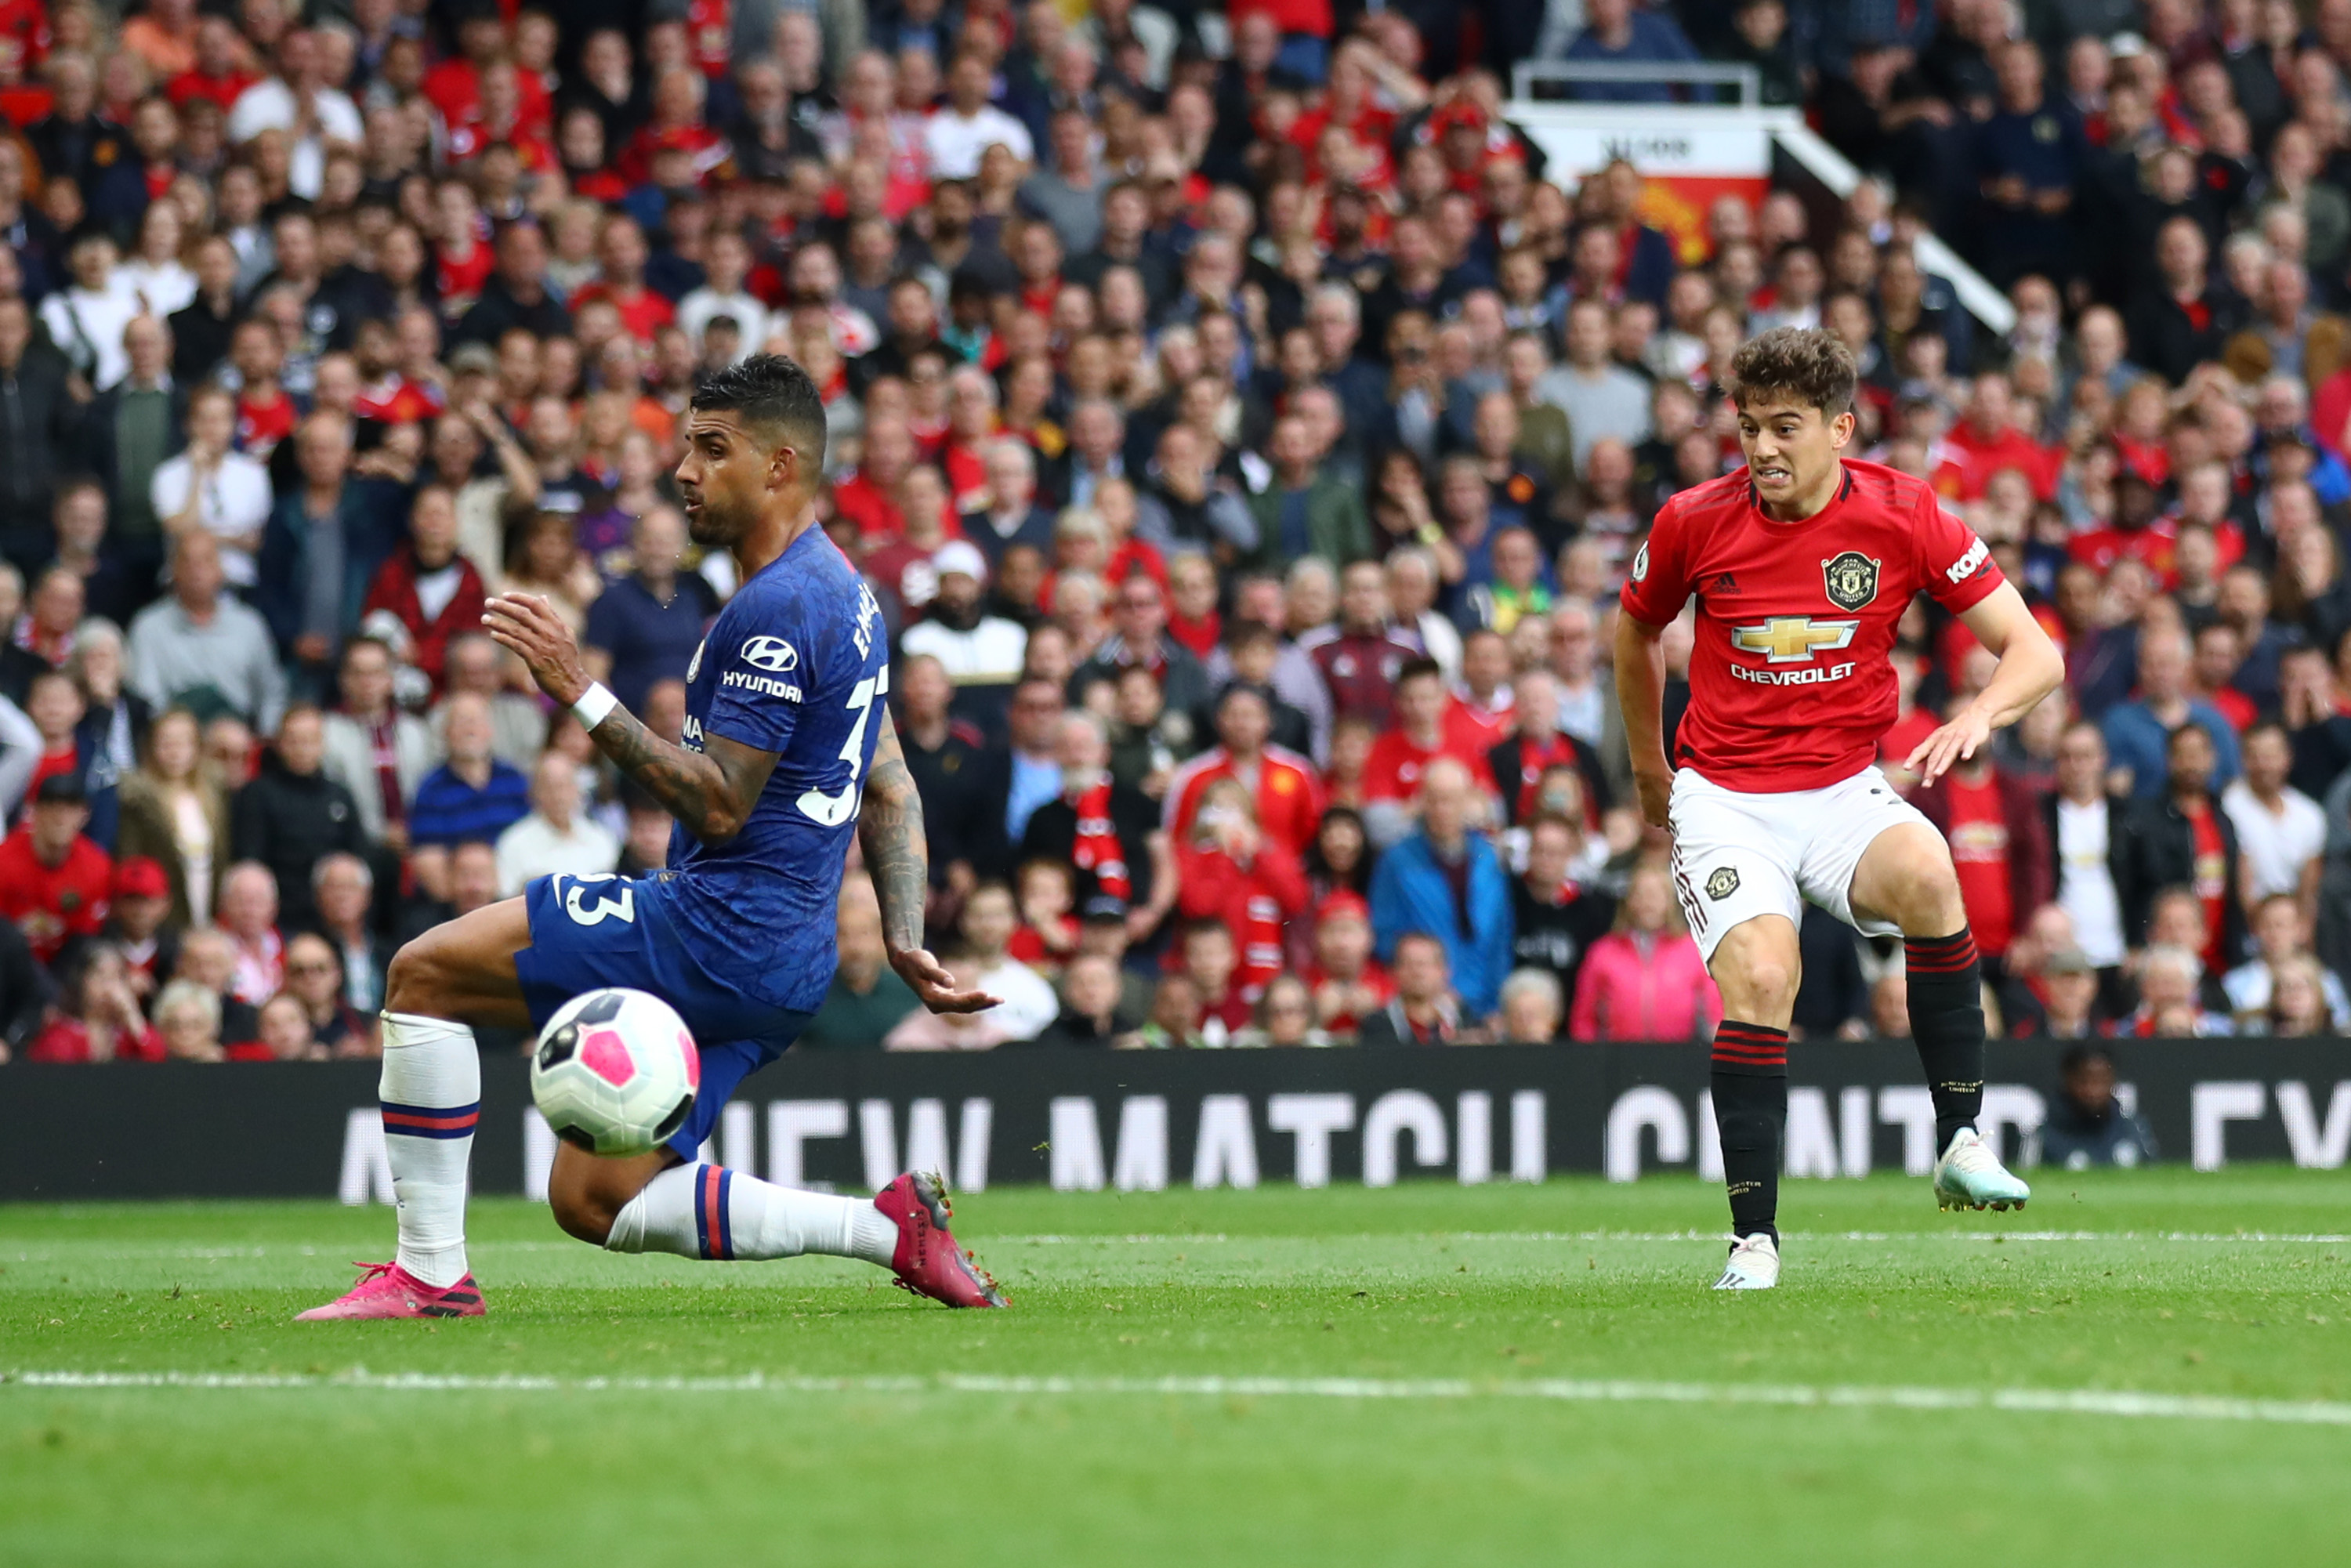 MANCHESTER, ENGLAND - AUGUST 11: Daniel James of Manchester United scores his team's fourth goal during the Premier League match between Manchester United and Chelsea FC at Old Trafford on August 11, 2019 in Manchester, United Kingdom. (Photo by Julian Finney/Getty Images)